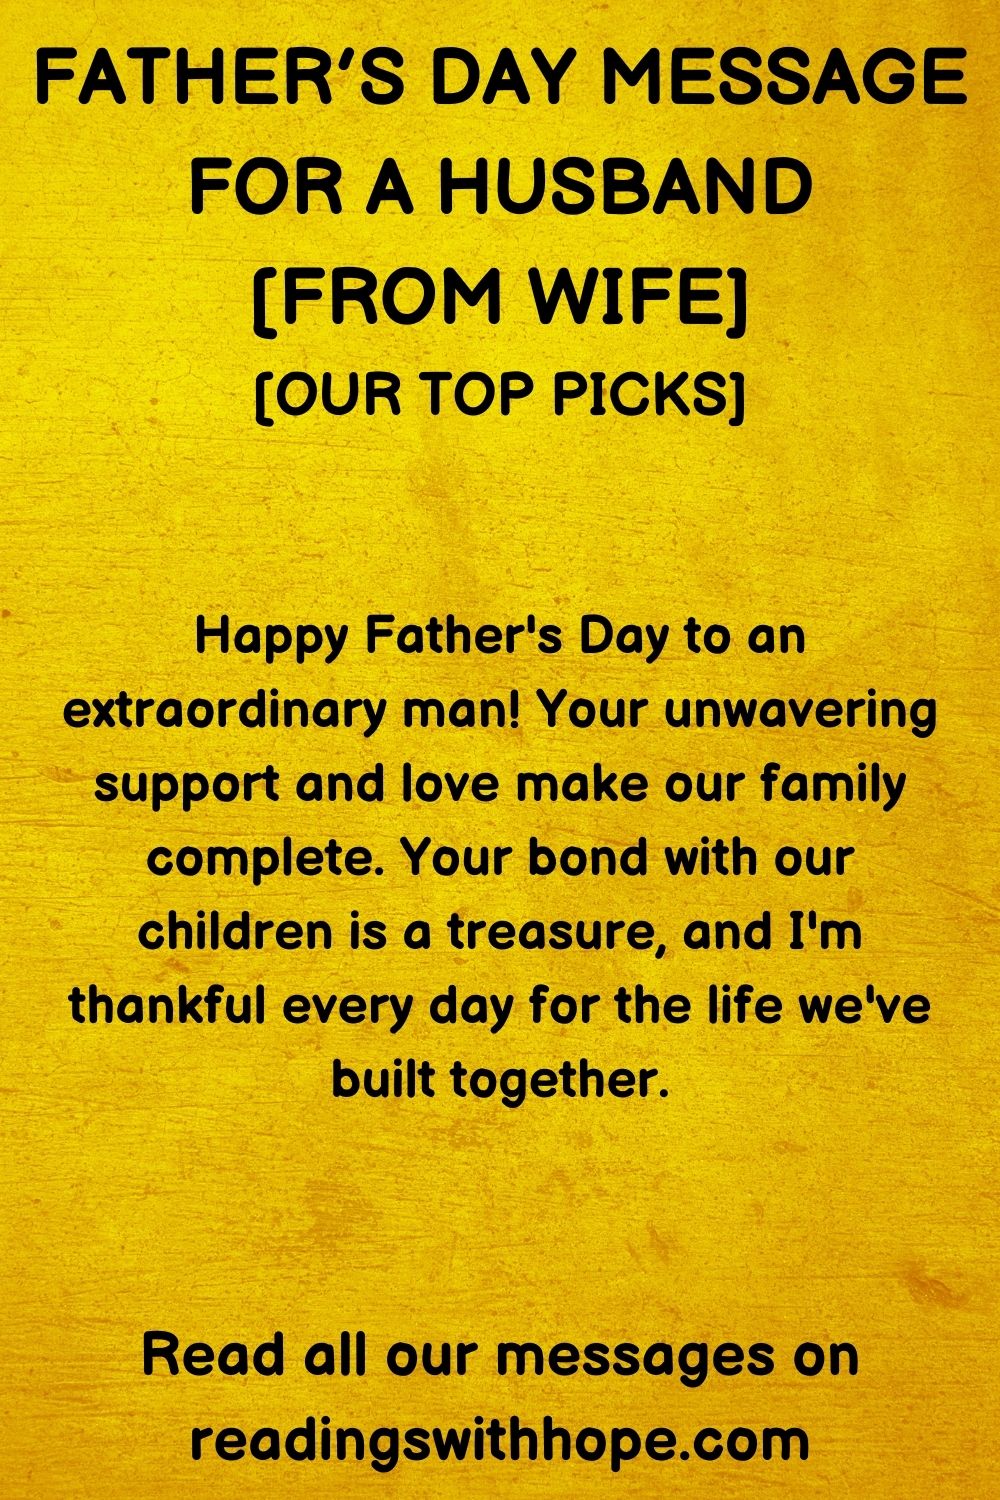 father's day message for a husband from wife